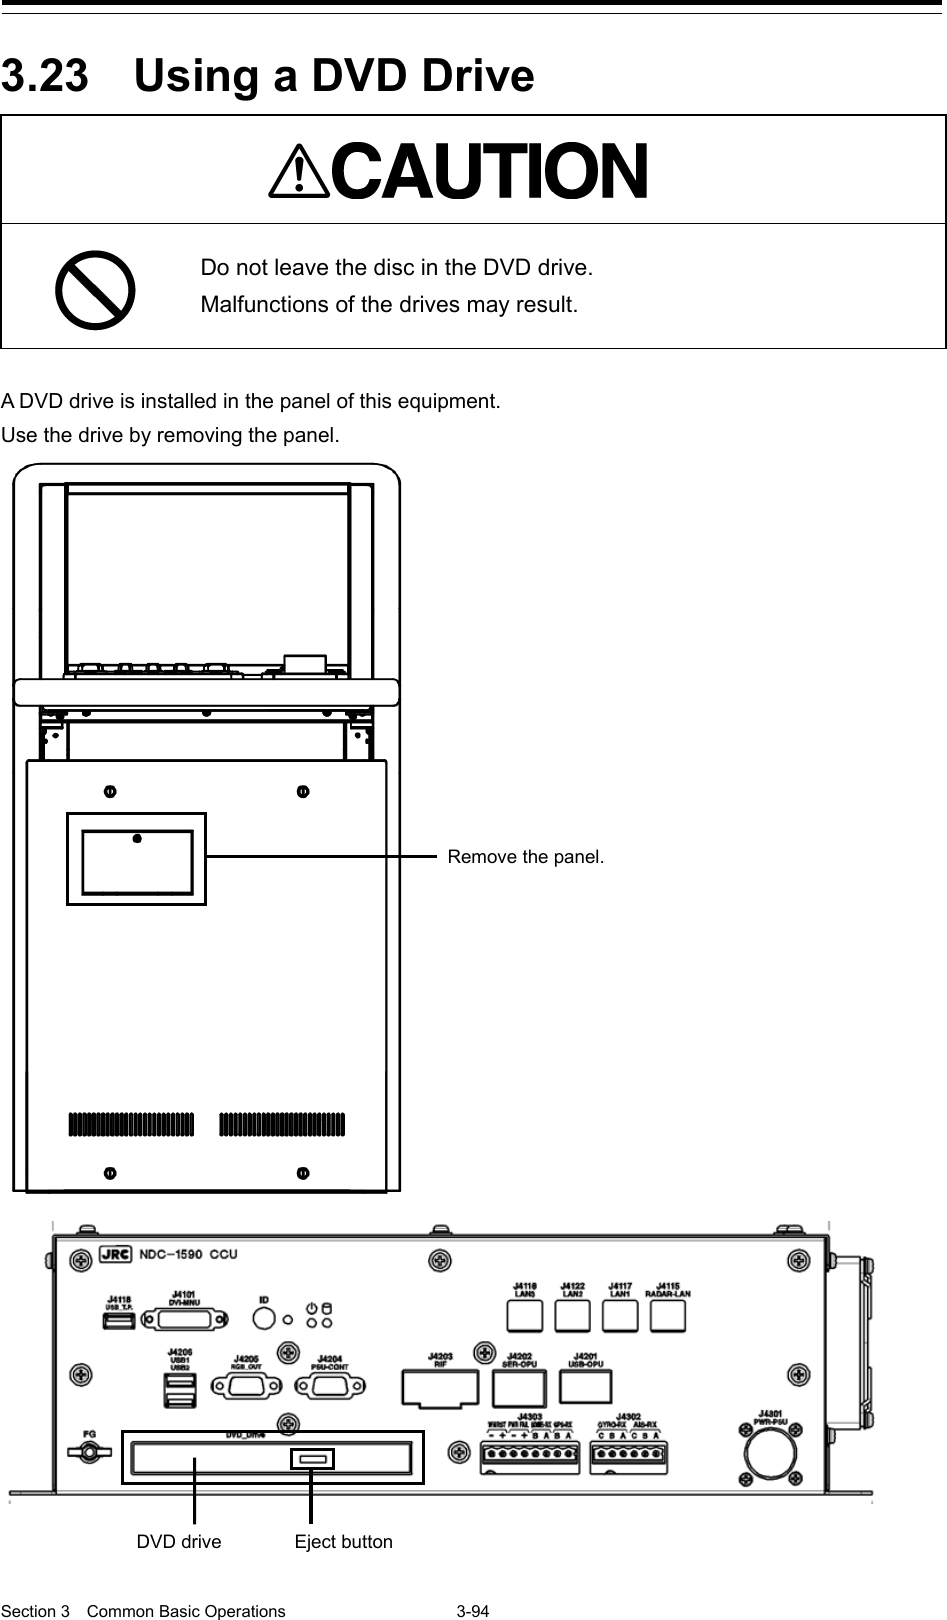  Section 3  Common Basic Operations  3-94  3.23  Using a DVD Drive   Do not leave the disc in the DVD drive. Malfunctions of the drives may result.  A DVD drive is installed in the panel of this equipment. Use the drive by removing the panel.   Remove the panel.   Eject button DVD drive 